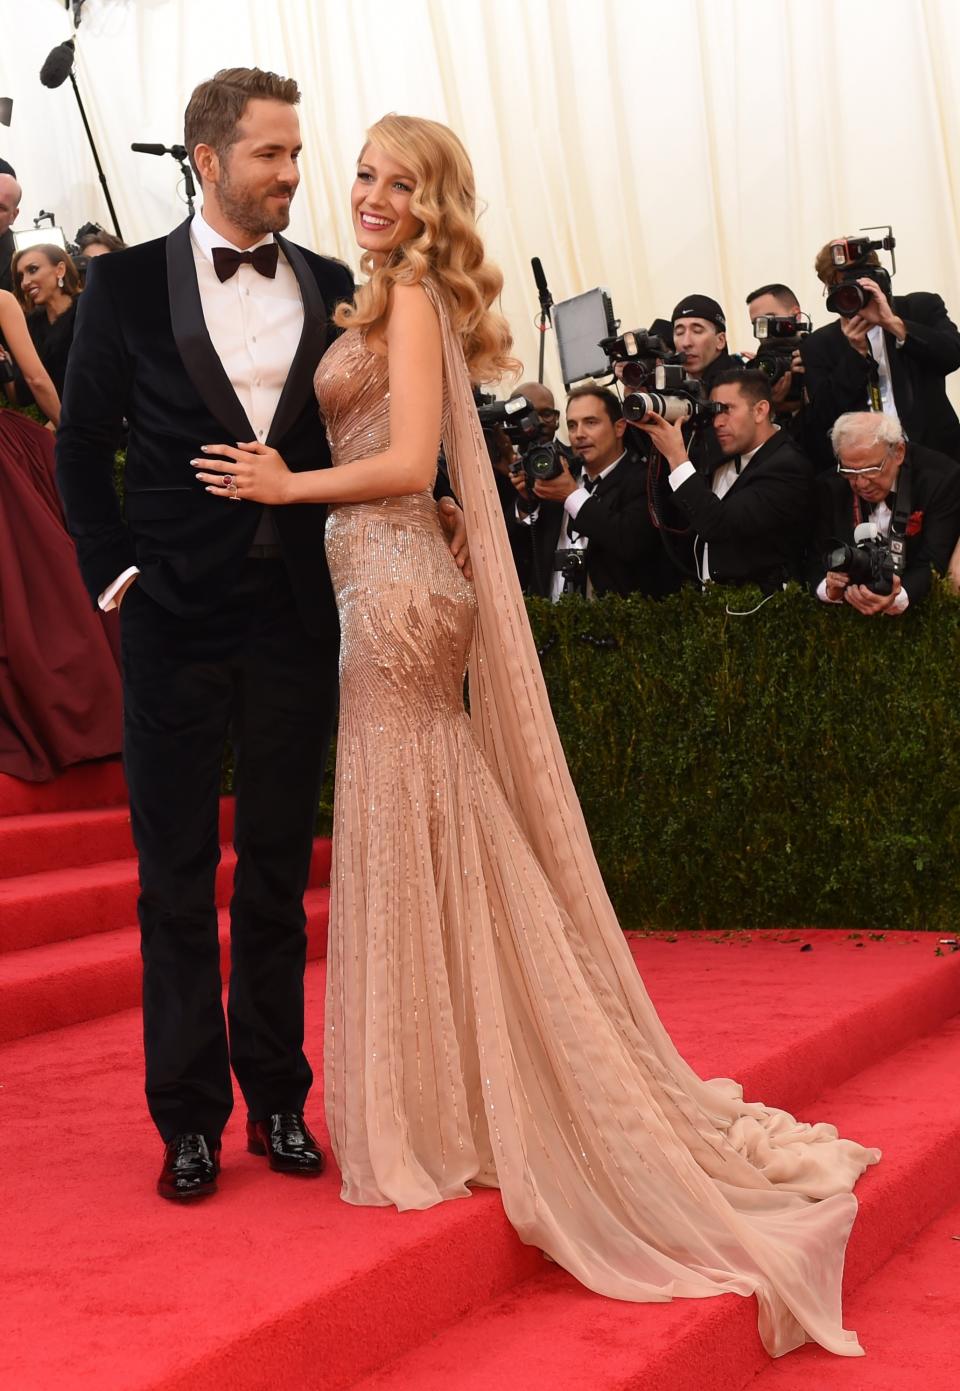 When Blake Lively and Ryan Reynolds made their Met Gala debut